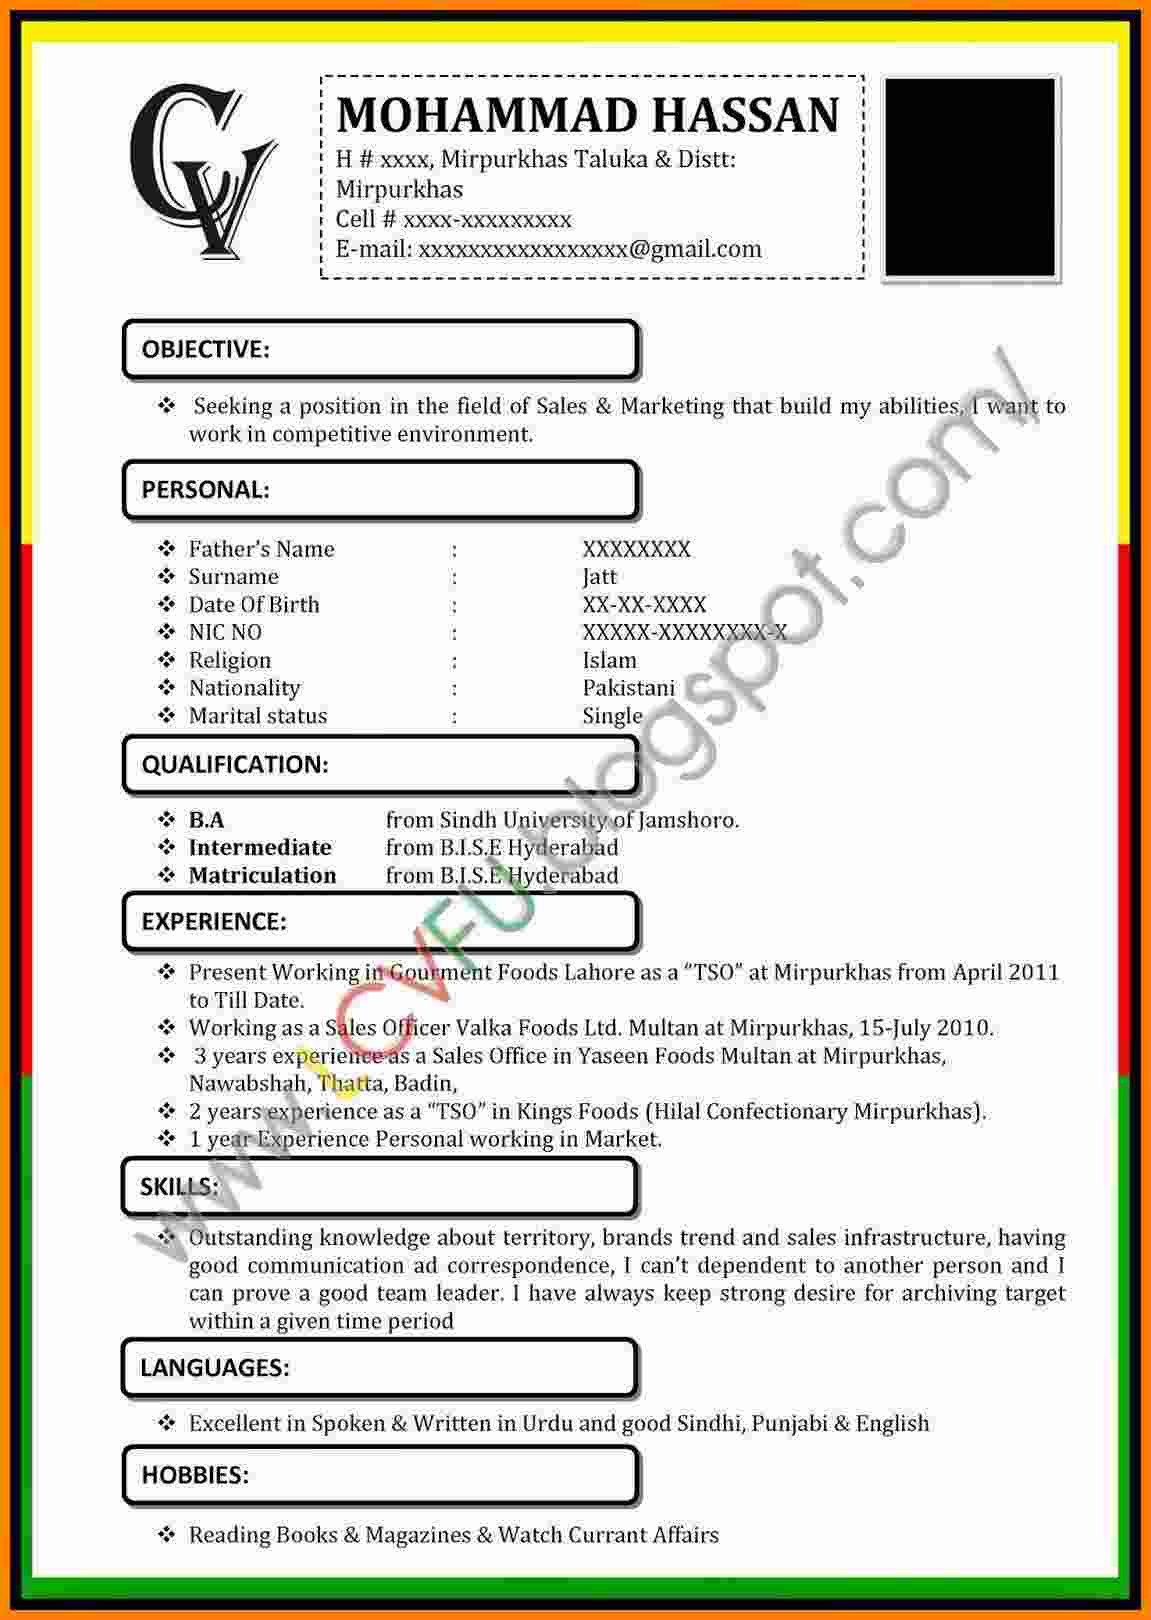 Cv Template Microsoft Word 2007 Resume templates for